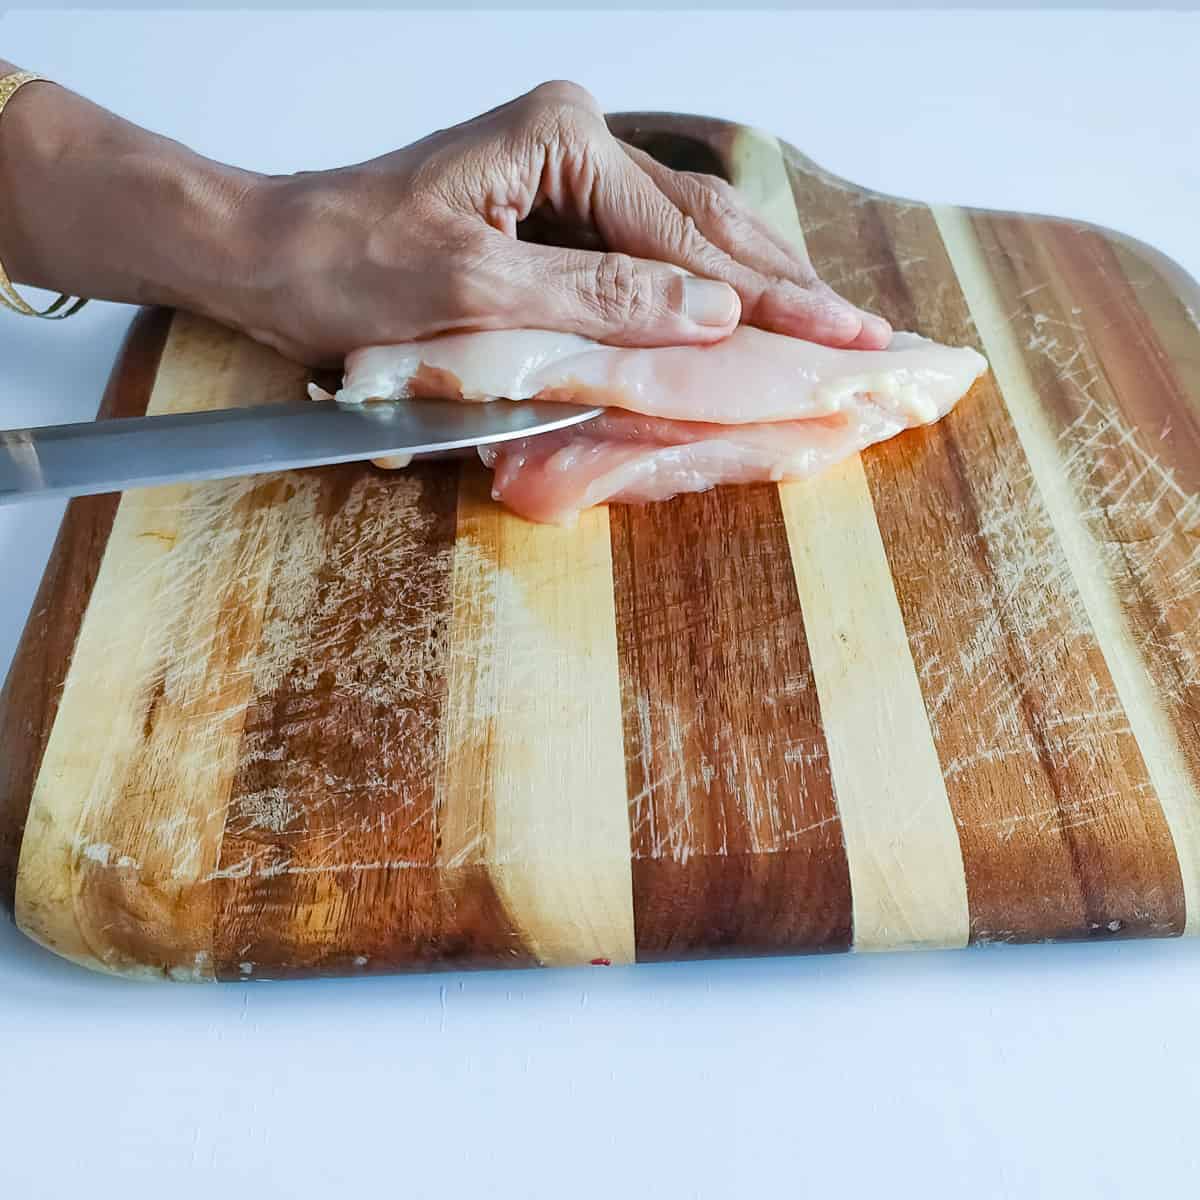 Chicken breast being thinly sliced with a knife on a chopping board.